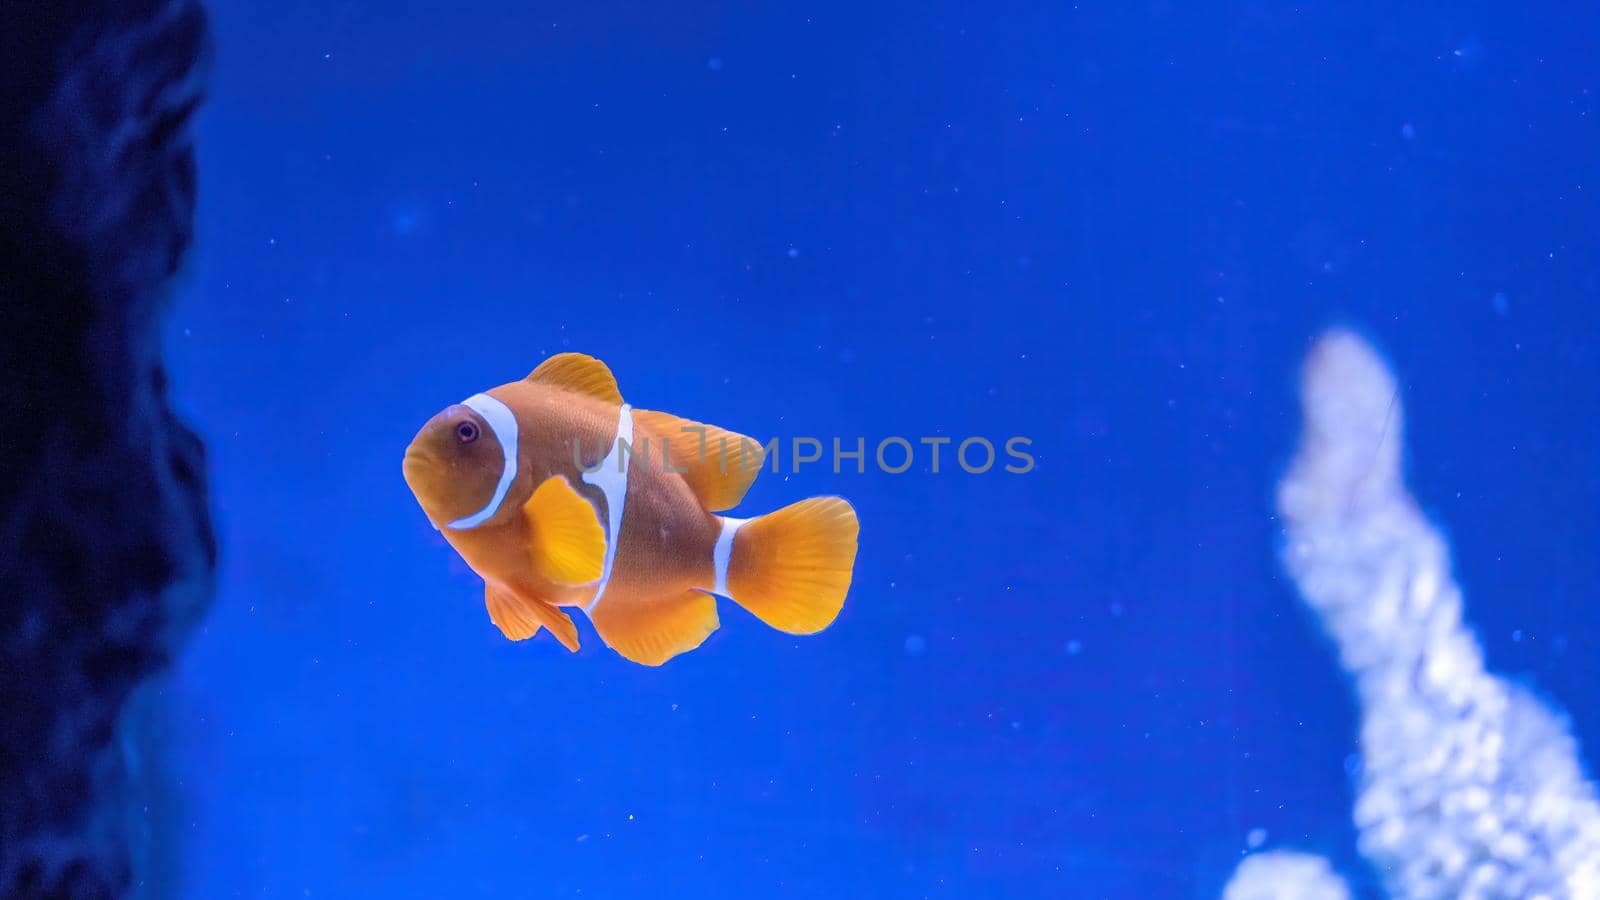 Colorful reef fish. Ocellaris clownfish, Amphiprion ocellaris, also known as the false percula clownfish or common clownfish by igor010